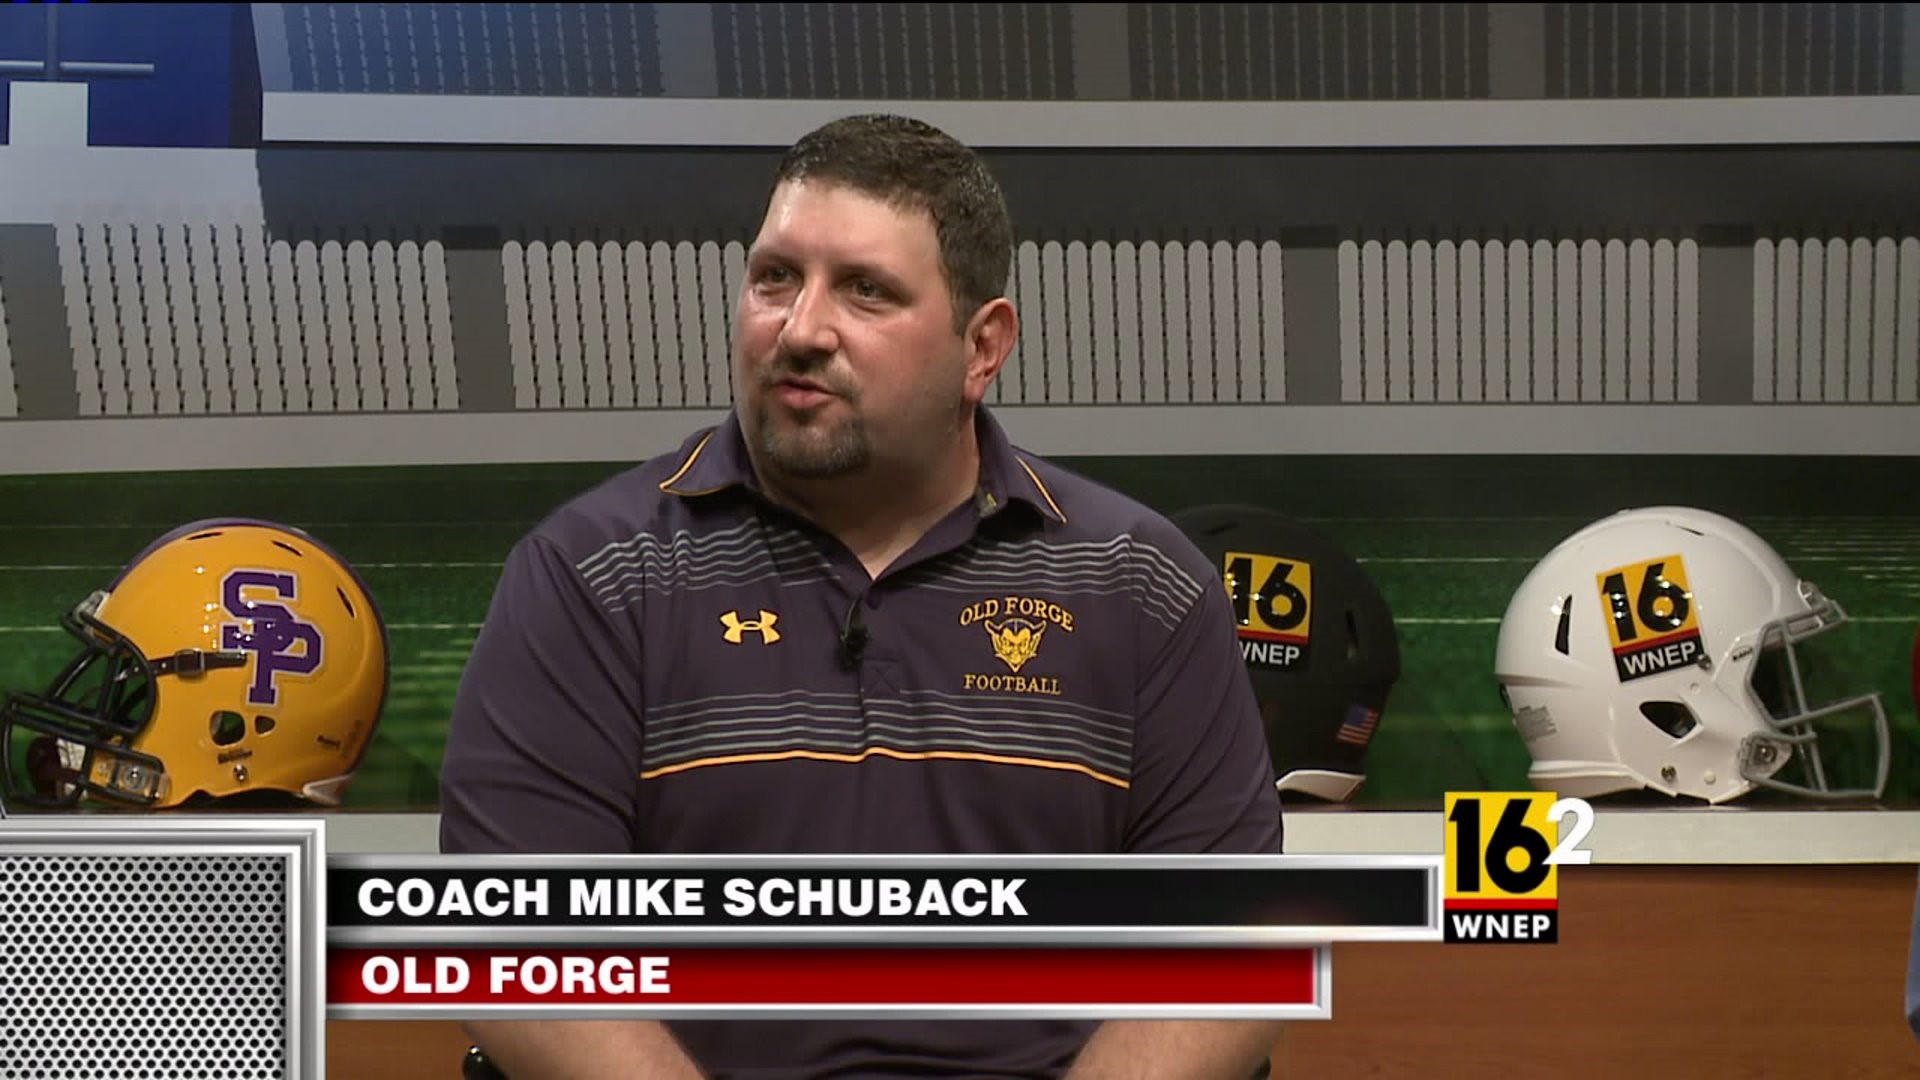 Old Forge Head Coach Mike Schuback